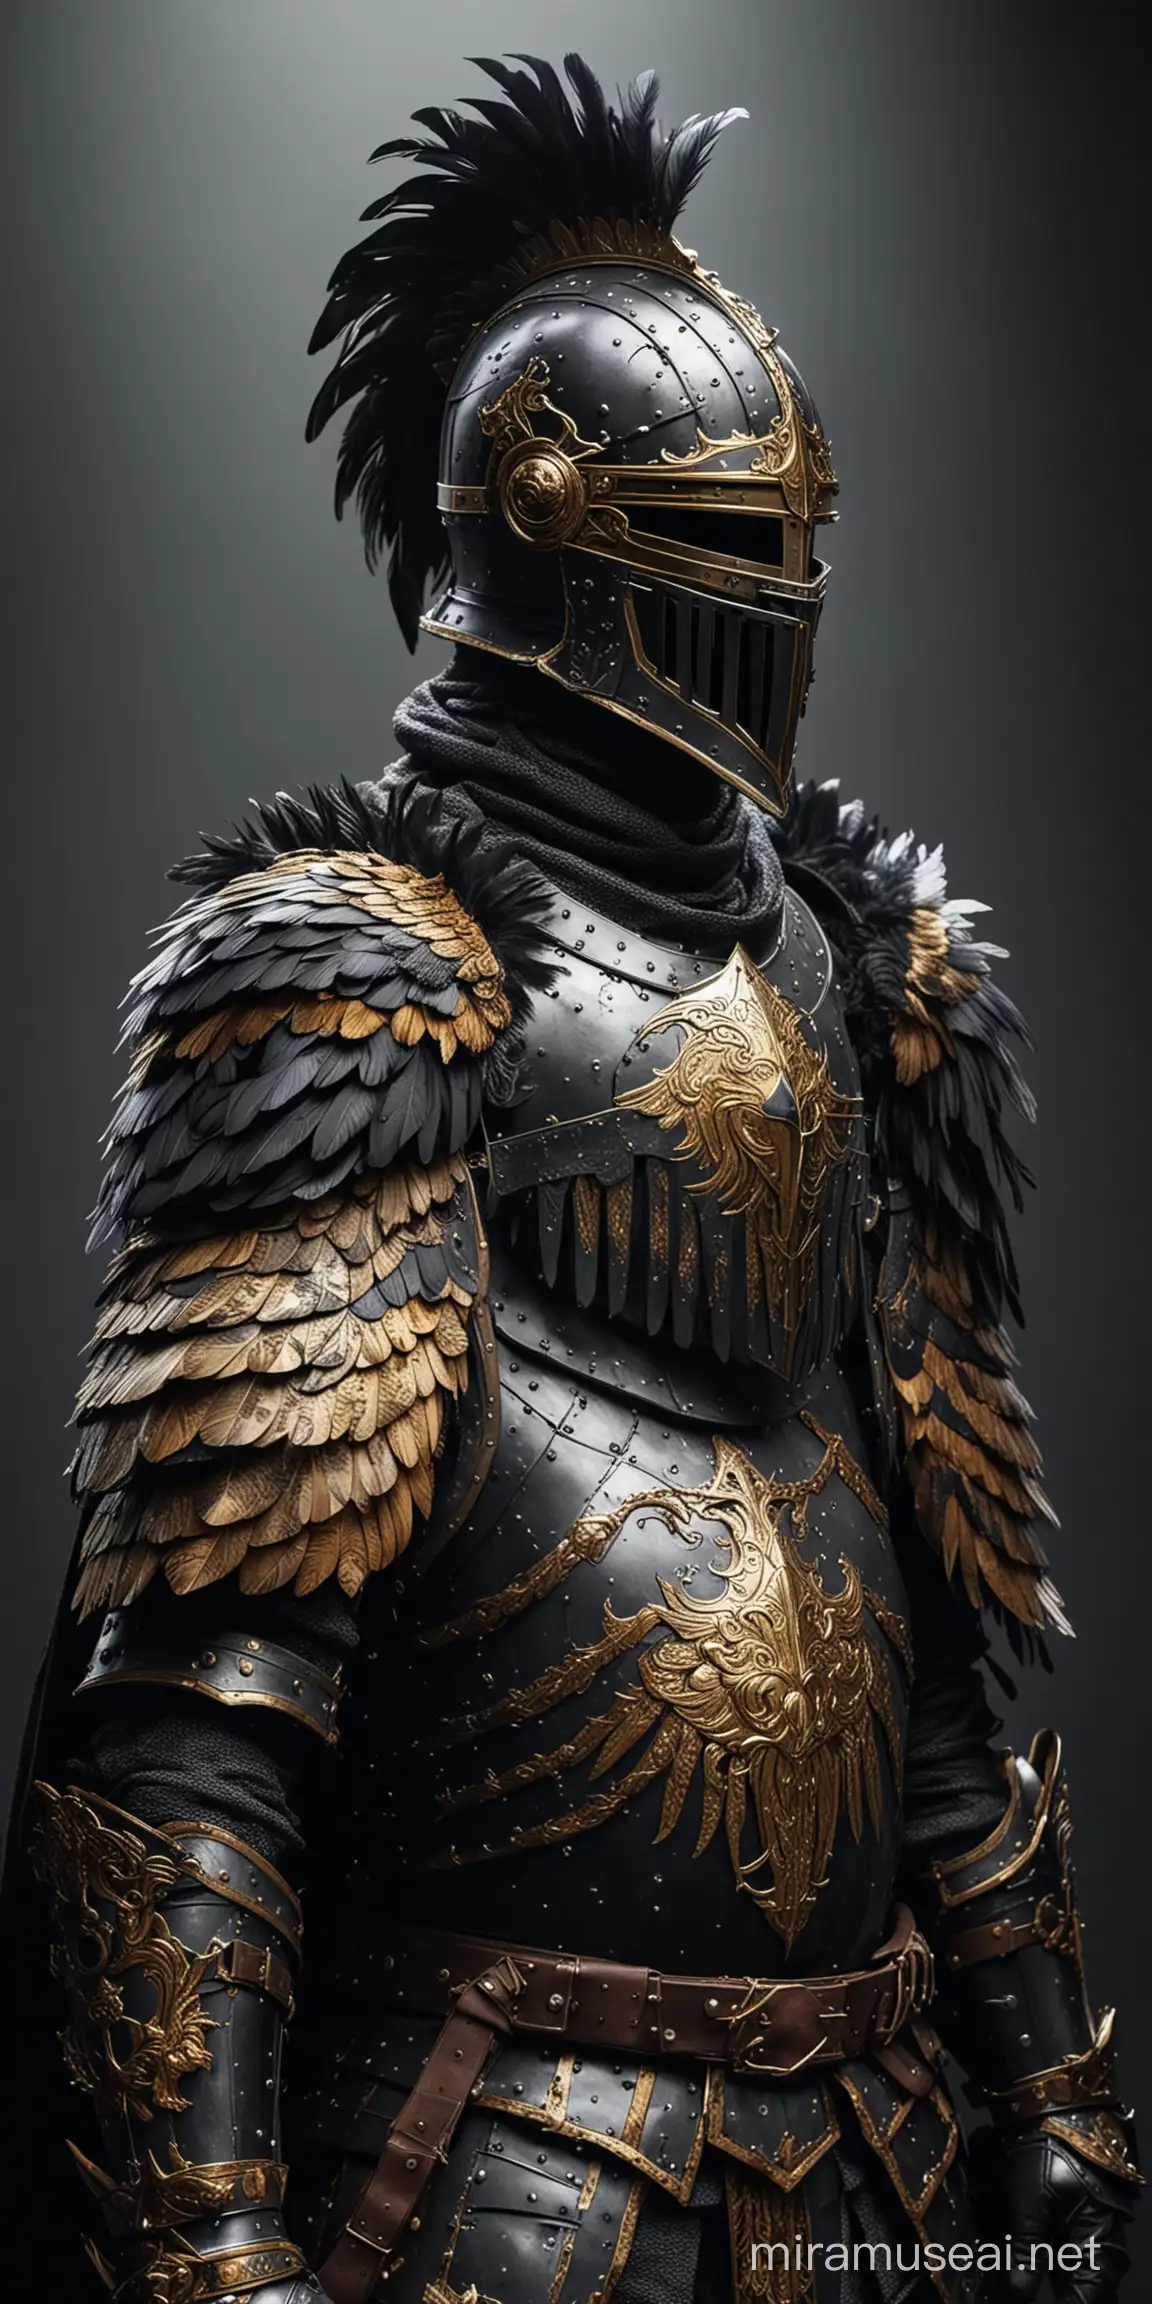 Regal Knight in Goldtrimmed Armor with Feather Cape Facing Forward